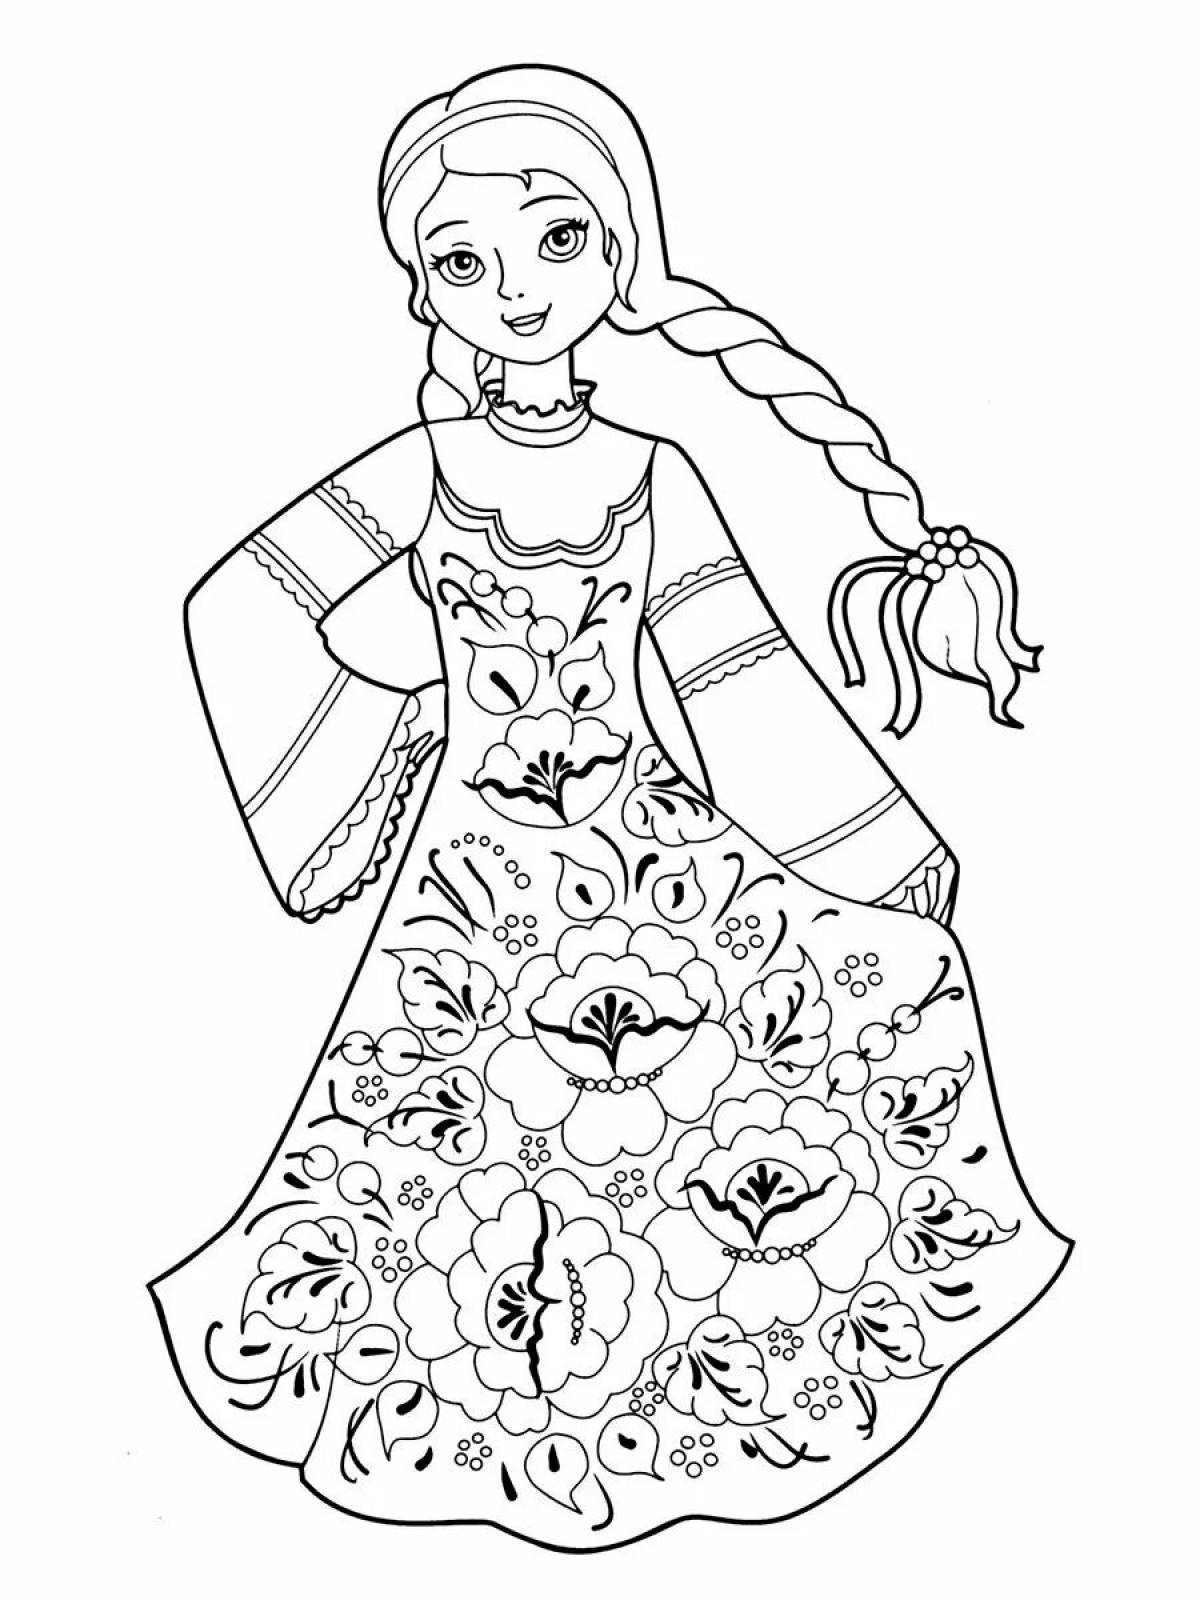 Animated russian girl coloring book